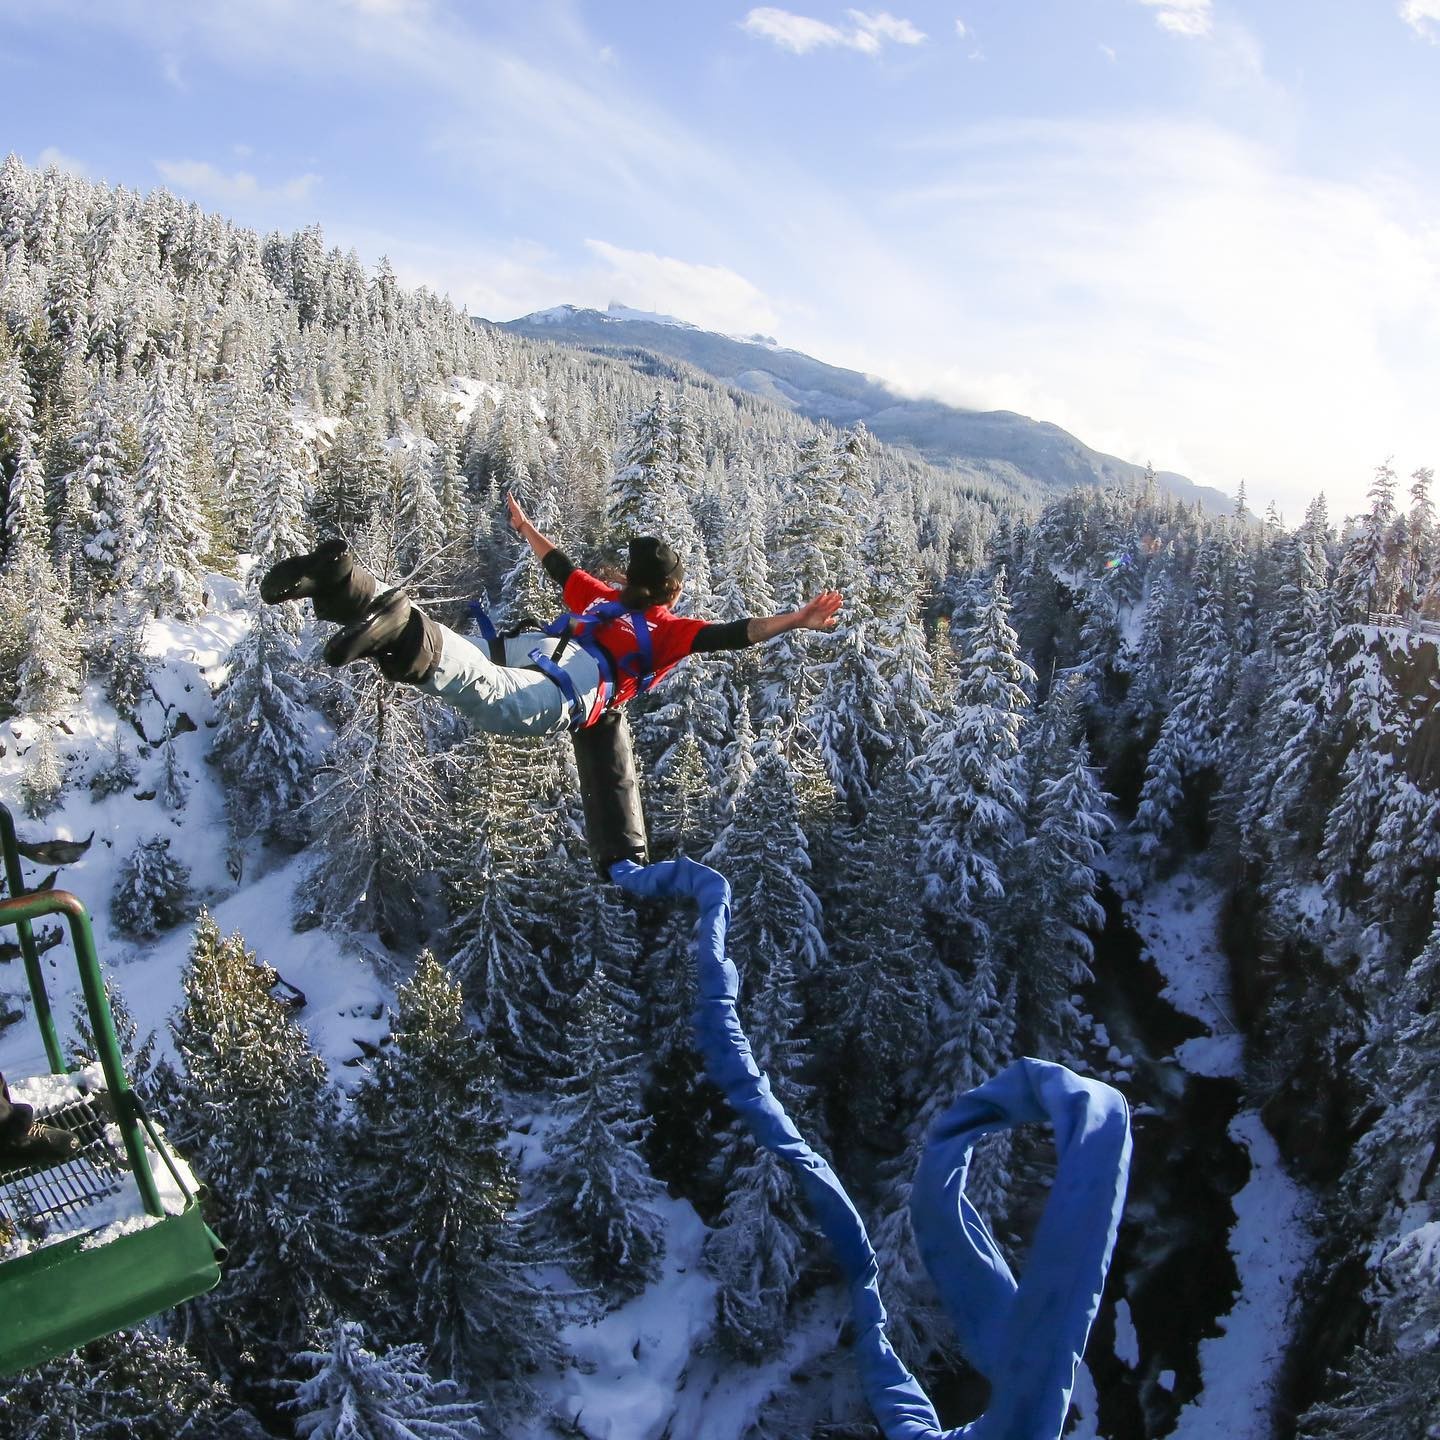 Activities: In addition to skiing and snowboarding, numerous activities such as zip-line tours, hiking trails, and spa services are available.